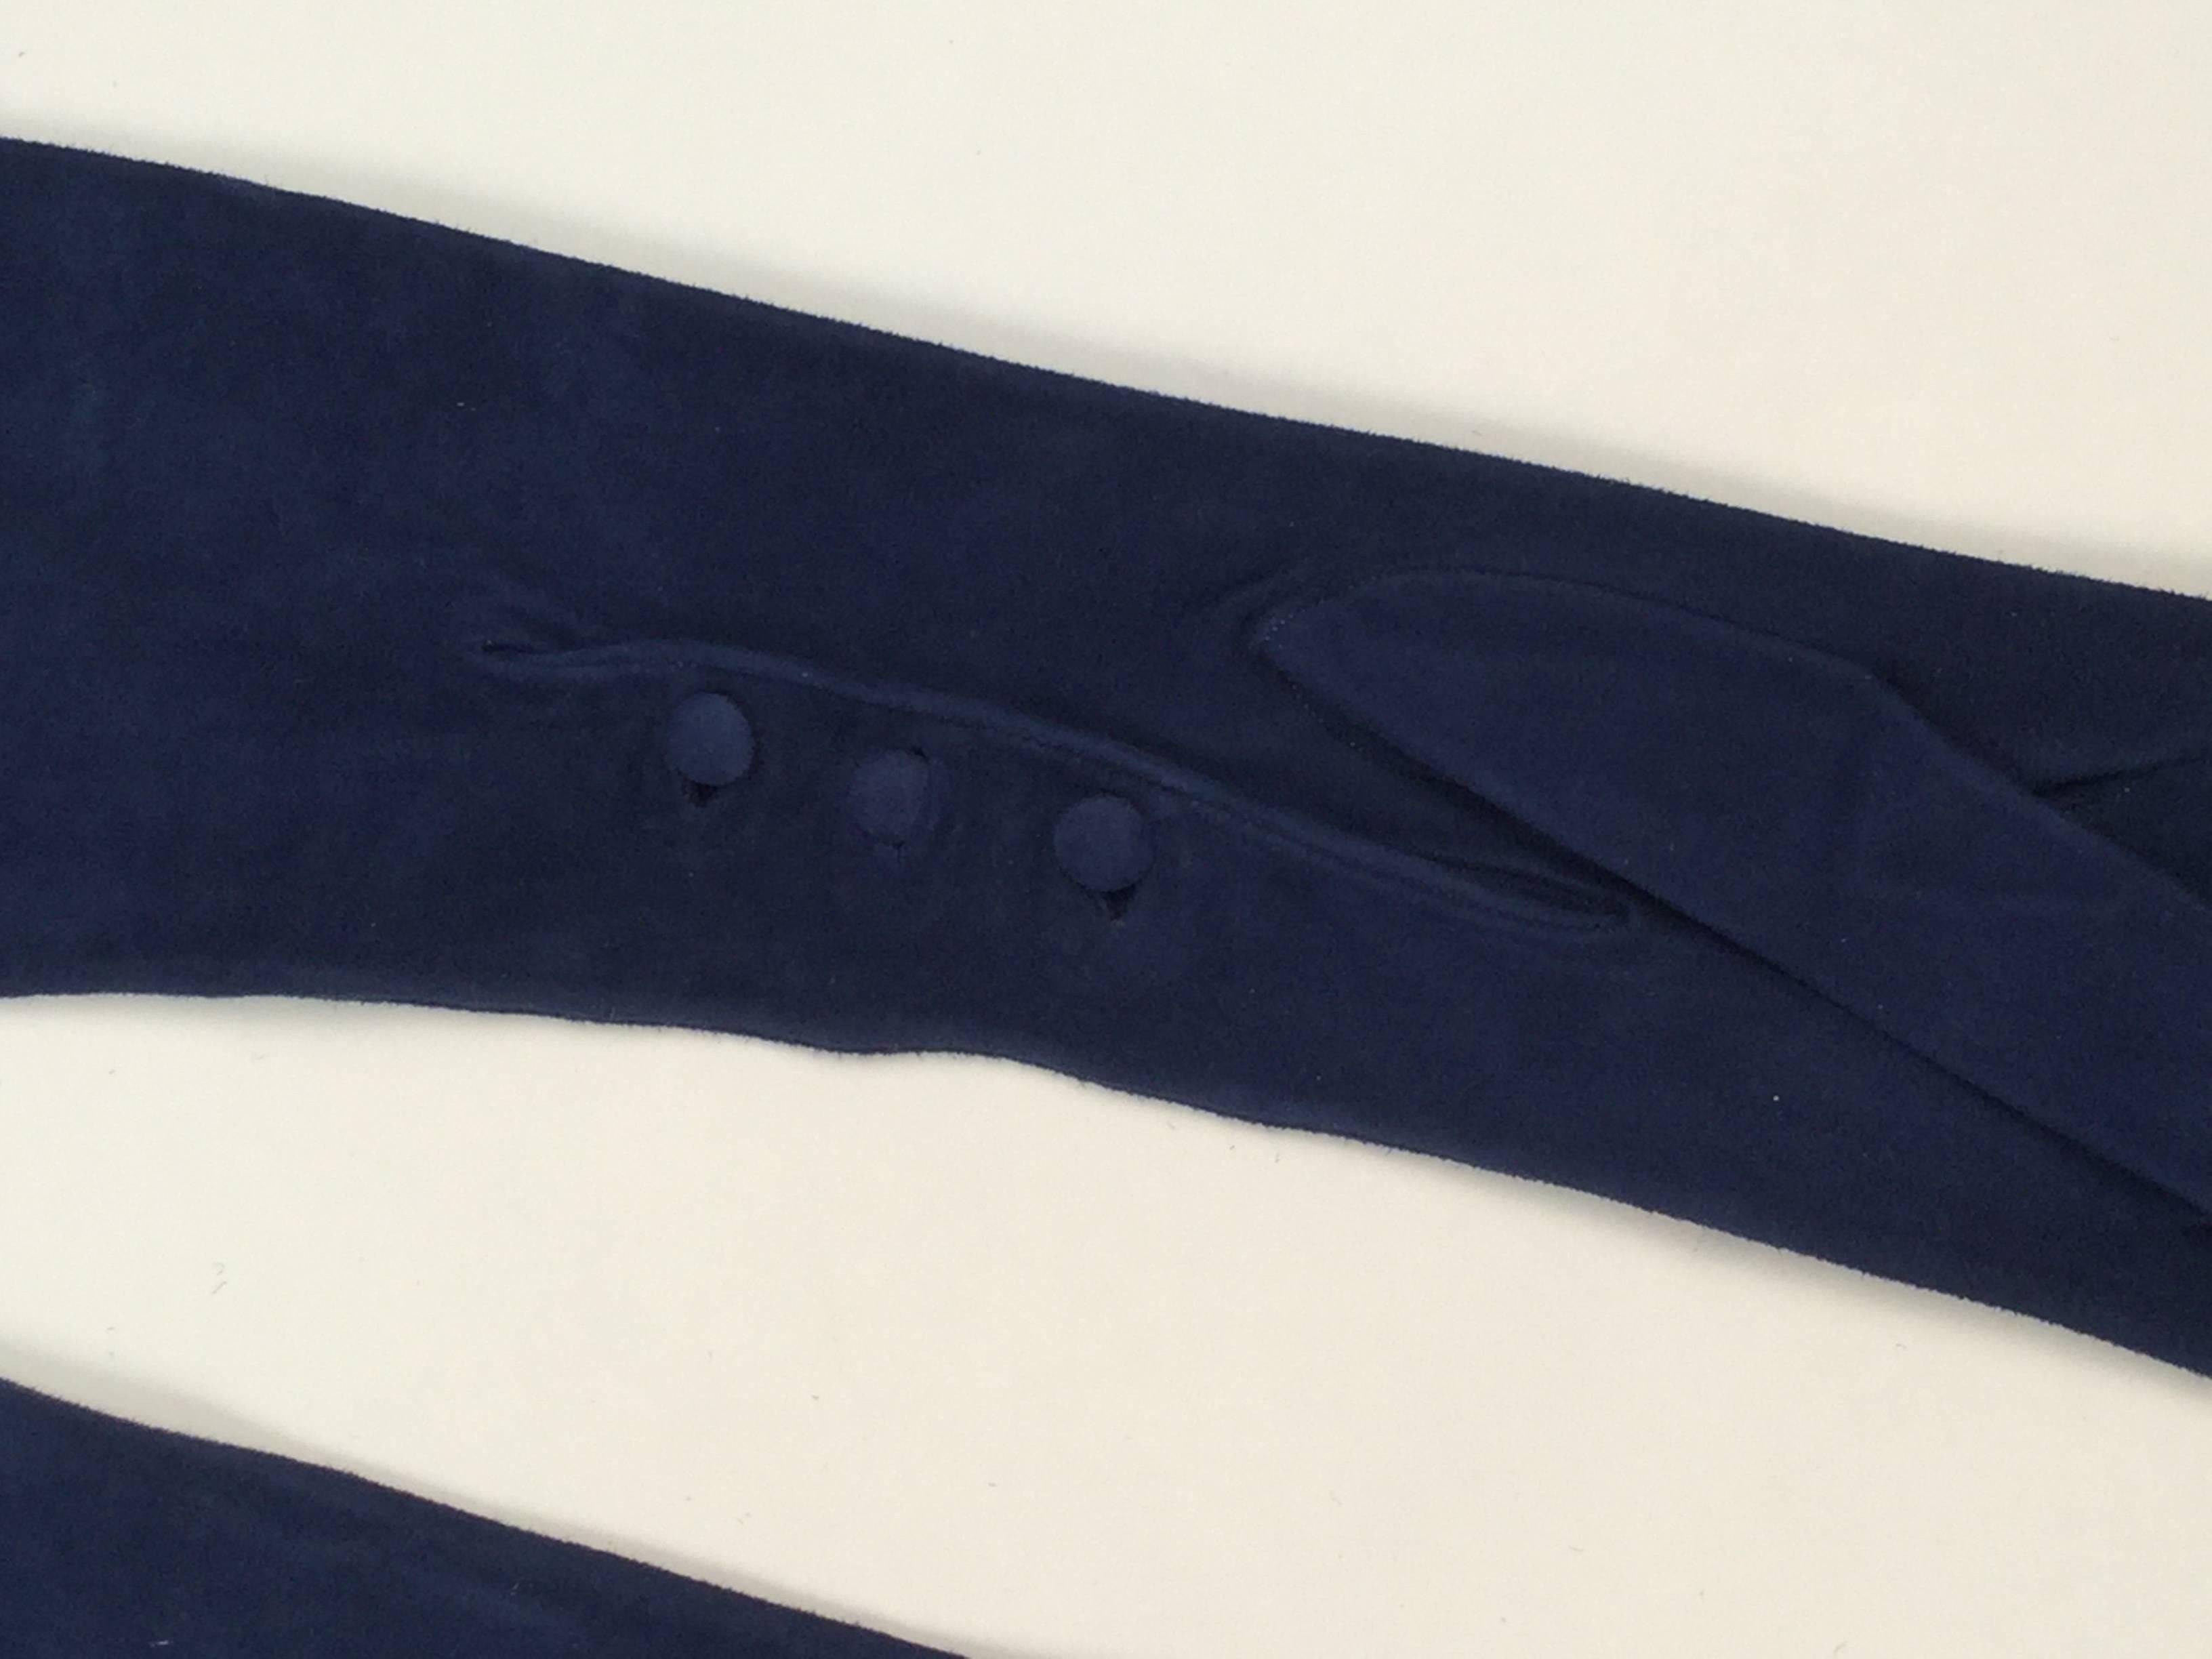 Unworn Christian Dior Parisian blue suede opera gloves. Three suede covered buttons at the wrist. Slight gathering and elastic at the hem. 

Marked Size 6 1/2, Small
Length 23.5 inches

*All garments and accessories have been professionally